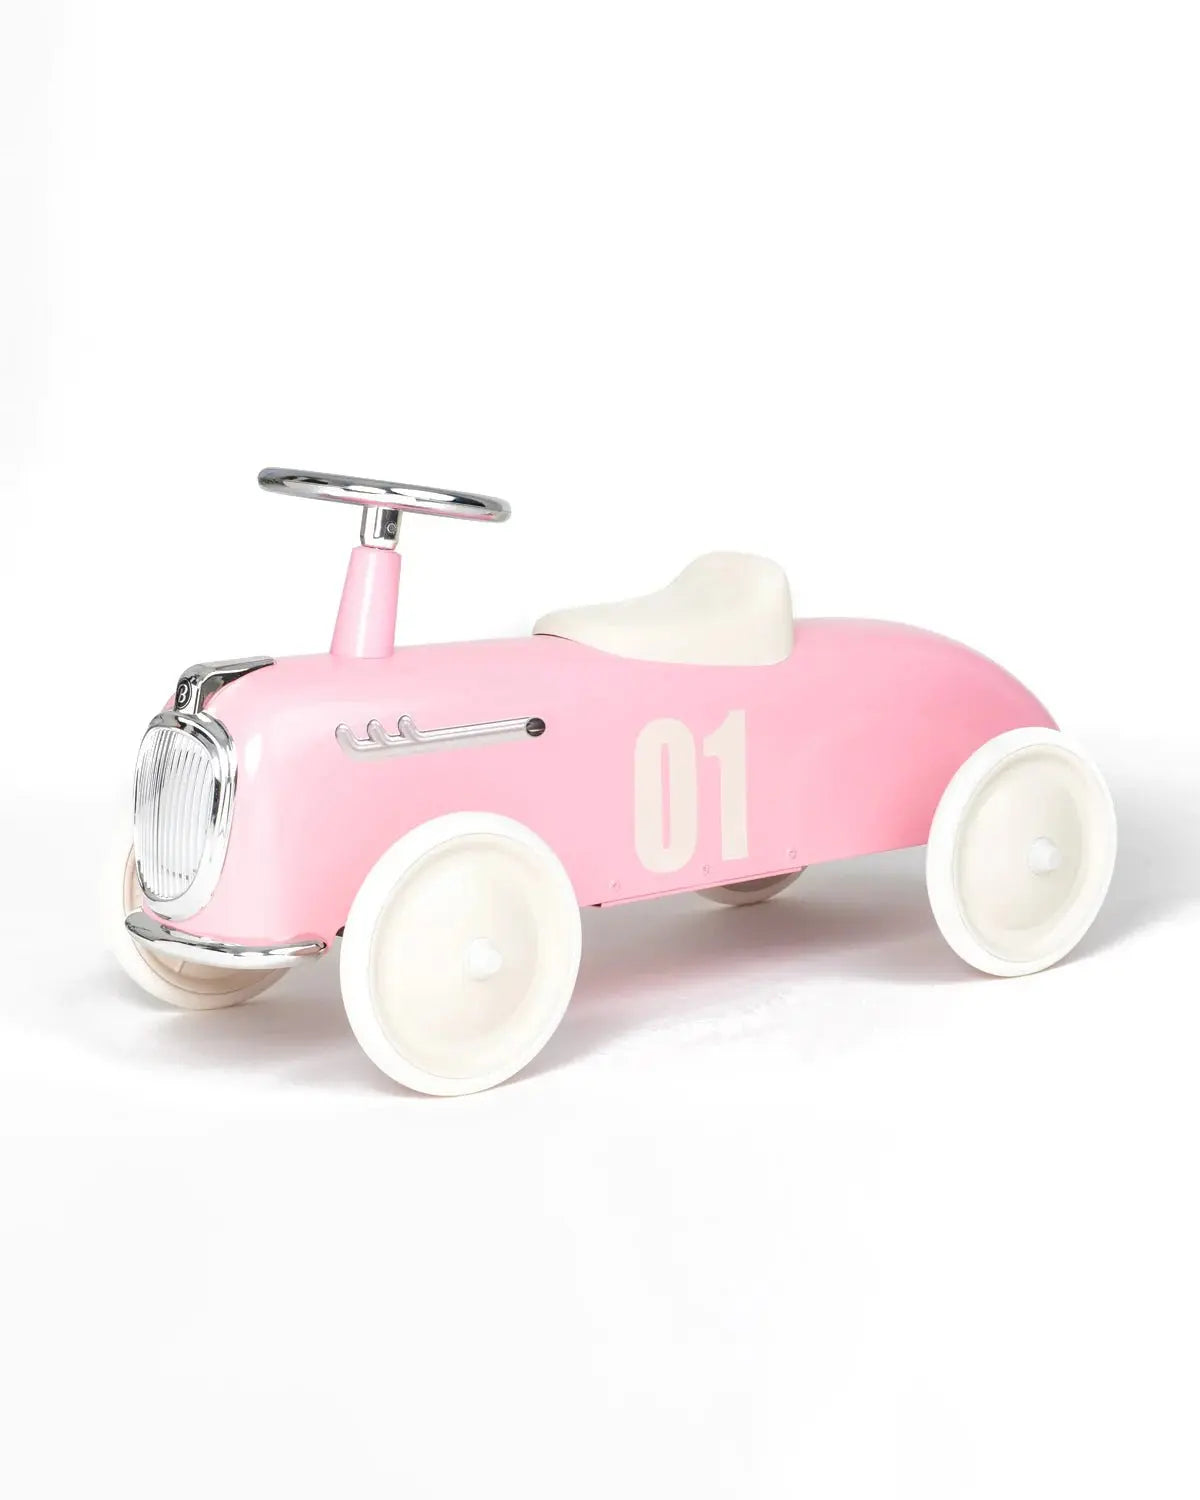 Roadster Ride-on Toy Car, Safe and Intuitive for Kids, Outdoor Playtime Fun, Children's Ride-on  Baghera Light Pink  